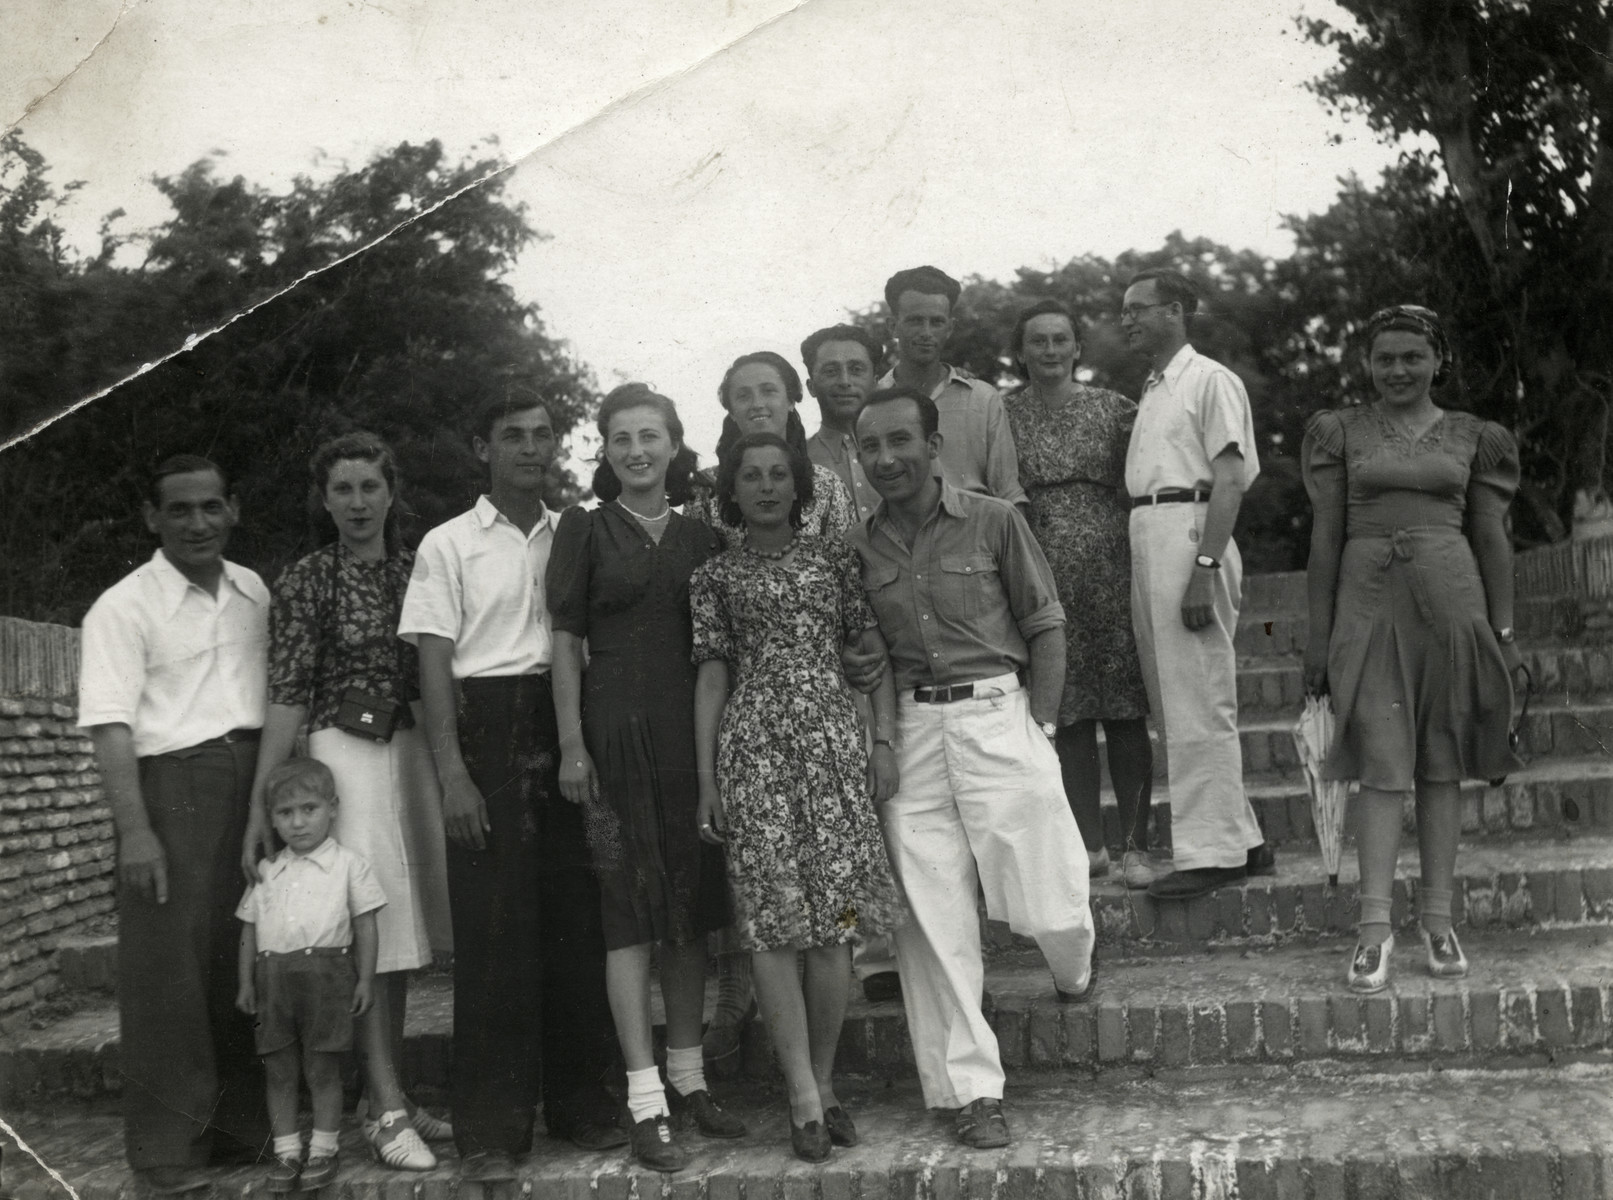 Polish Jewish refugees in Bukhara pose for a group photograph while on an outing.

Jonas, Benjamin and Rywka Markowicz are on the left.